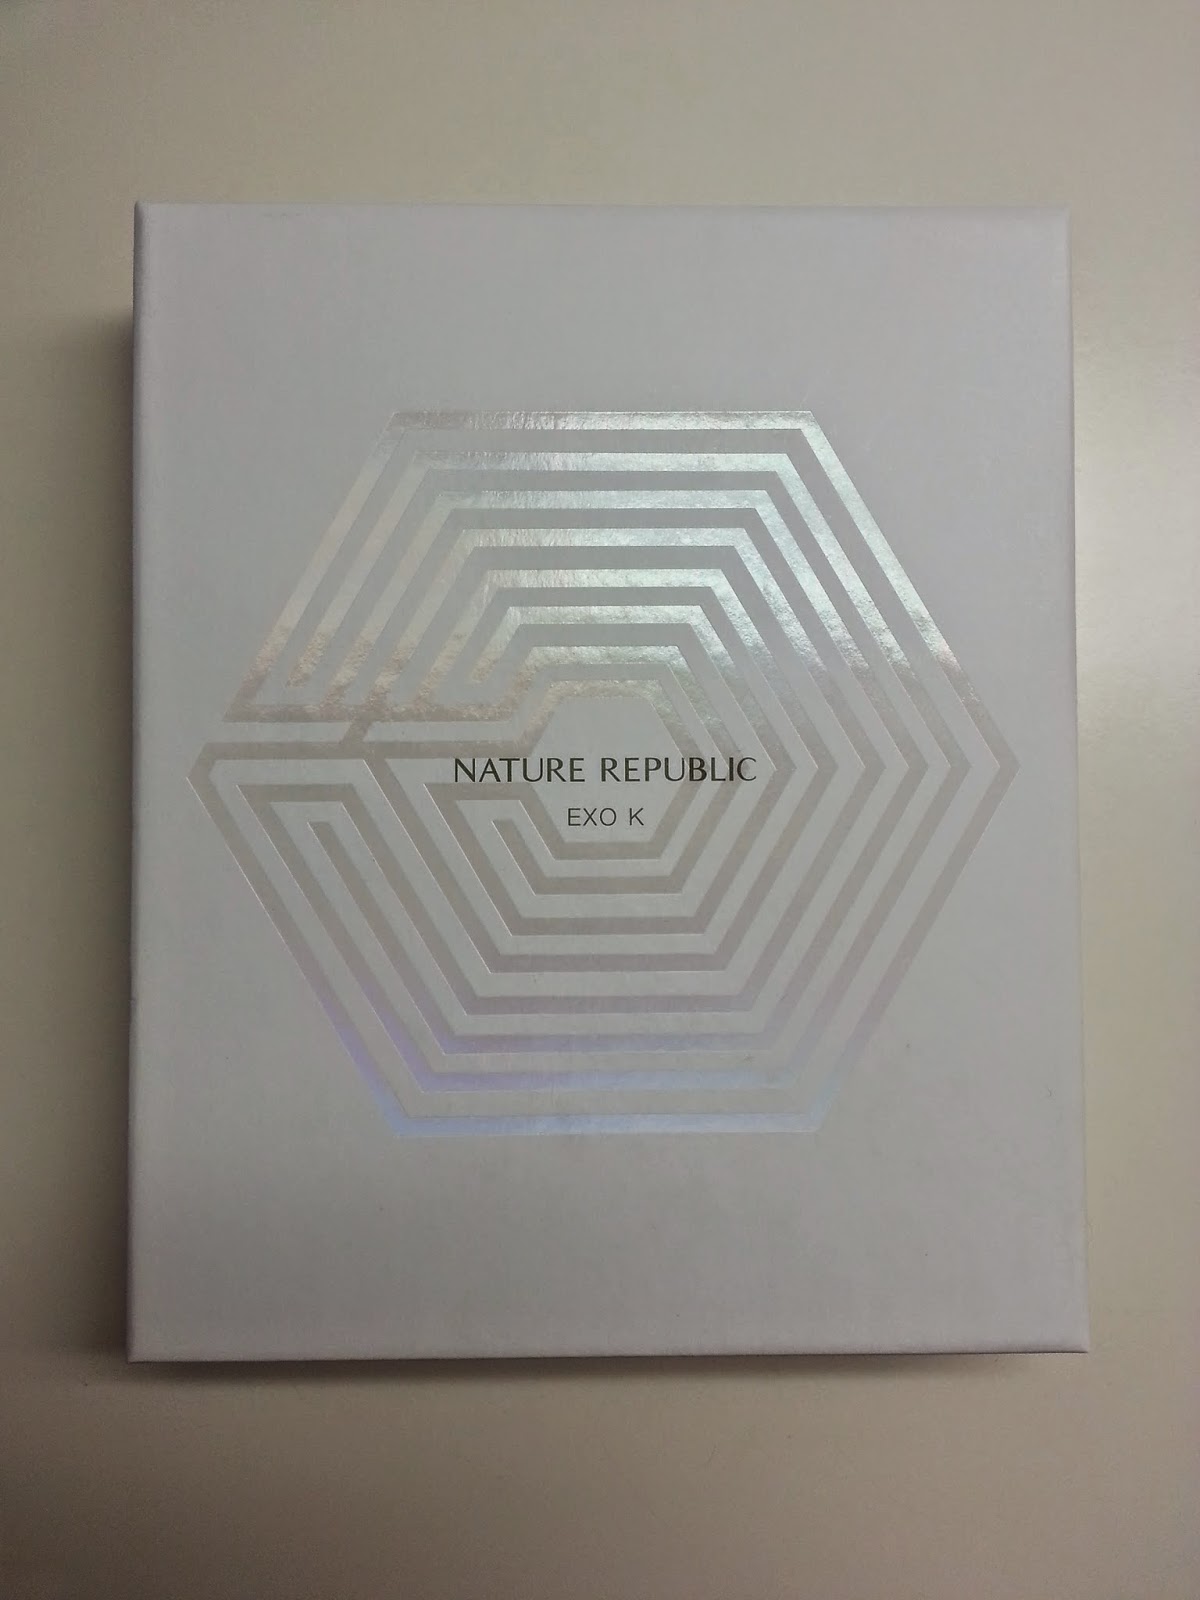 Yonghwaiting Hoodlums: EXO-K Nature Republic Cleansing Soap Set REVIEW